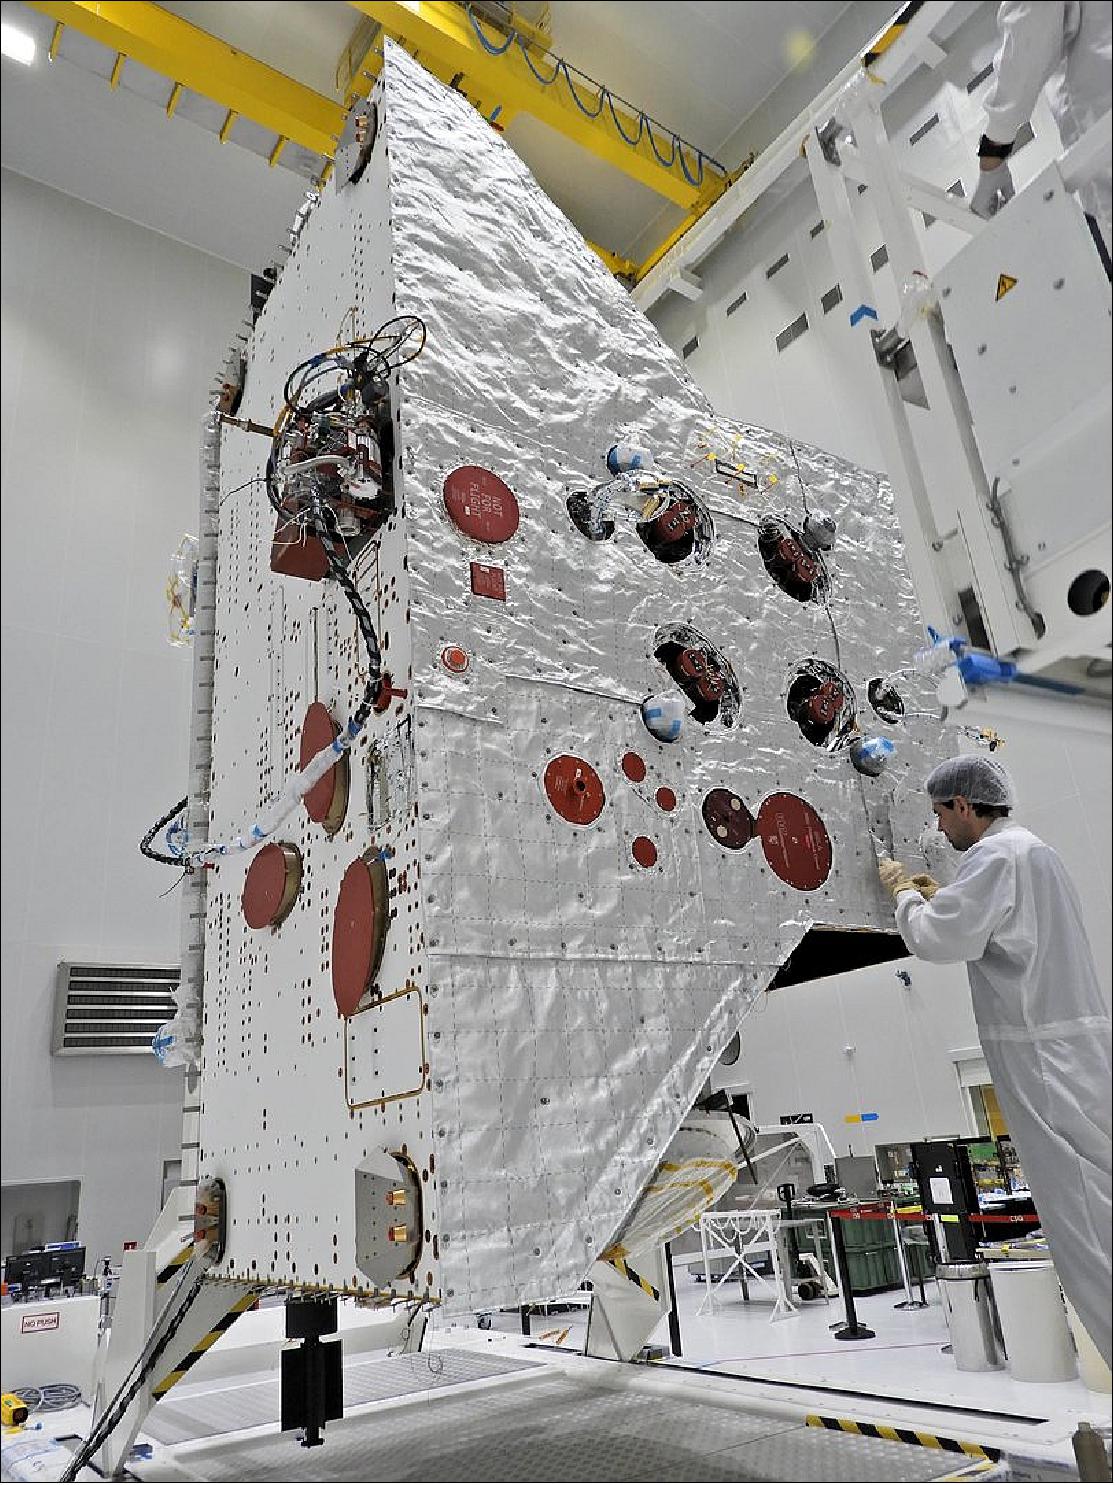 Figure 119: One of the main activities in recent weeks for the BepiColombo team at Europe’s Spaceport in Kourou has been the installation of multi-layered insulation foils and sewing of high-temperature blankets on the Mercury Planetary Orbiter. The insulation is to protect the spacecraft from the extreme thermal conditions that will be experienced in Mercury orbit. While conventional multi-layered insulation appears gold-colored, the upper layer of the module’s striking white high-temperature blanket provides the focus of this image. The white blankets are made from quartz fibres. Because the fabric is not electrically conductive, to control the build-up of electrostatic charge on the surface of the spacecraft, conducting threads have been woven through the outer layer every 10 cm. The edges of the outer blanket are hand-sewn together once installed on the module, as seen in this image. - The face of the spacecraft the engineer is working on is the panel that will always look at Mercury’s surface and as such many of the science instruments are focused here. This includes the orbiter’s cameras and spectrometers, a laser altimeter and particle analyzer. The panel also has fixtures to connect the module to the Transfer Module during the cruise to Mercury. - The face of the spacecraft pointing to the left in this orientation is the spacecraft radiator, which will eventually be fitted with ‘fins’ designed to reflect heat directionally, allowing the spacecraft to fly at low altitude over the hot surface of the planet. Heat generated by spacecraft subsystems and payload components, as well as heat that comes from the Sun and Mercury and ‘leaks’ through the blankets into the spacecraft, will be conducted to the radiator by heat pipes and ultimately radiated into space. - The oval shapes correlate to star trackers, used for navigation, while a spectrometer is connected with ground support equipment towards the top. At the back of this face, the magnetometer boom can be seen folded against the spacecraft – it has now also been fitted with multi-layered insulation.